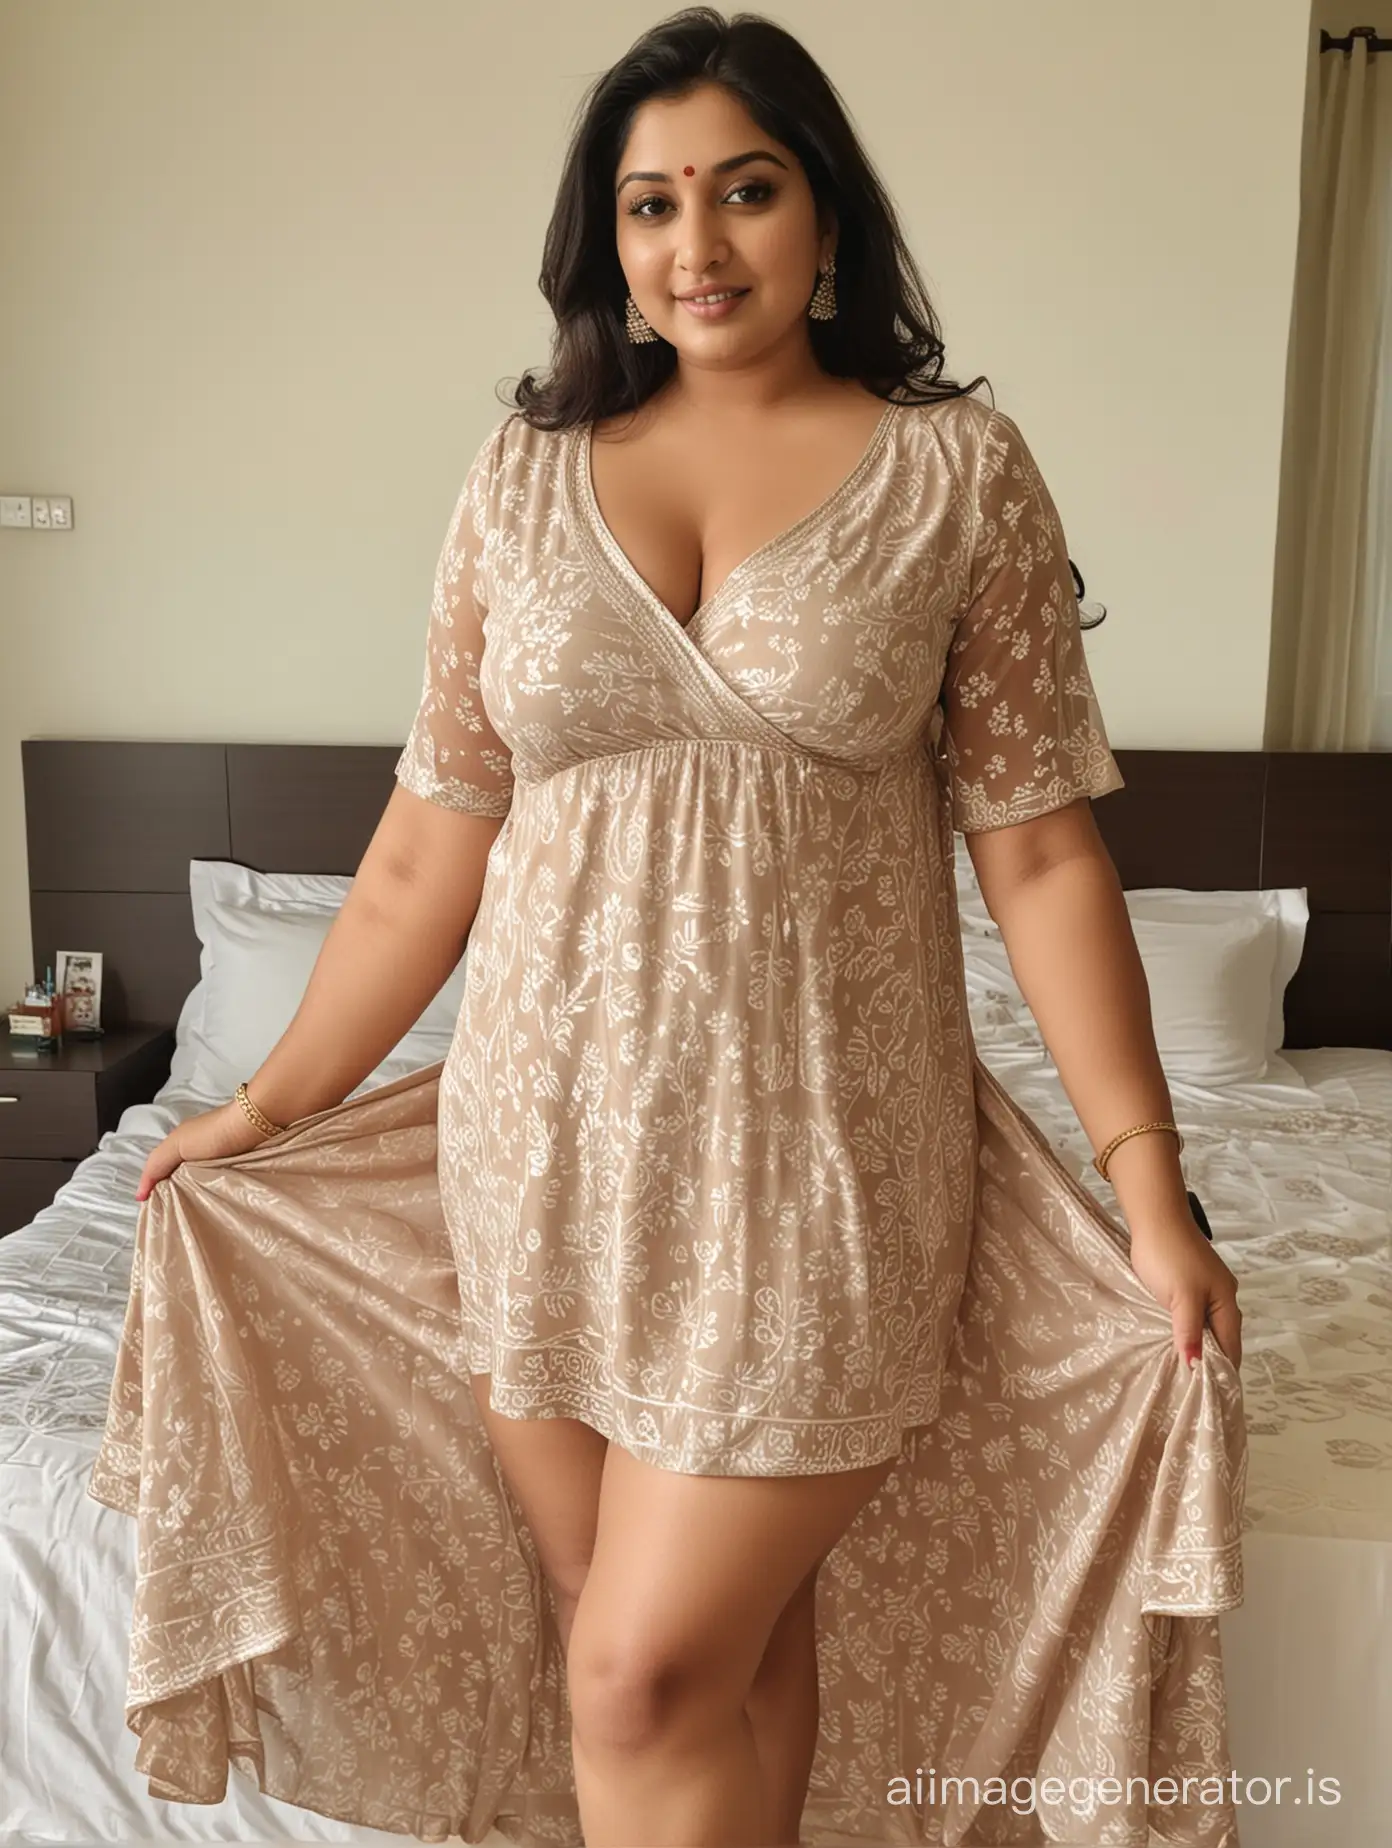 Sexy indian aged 30 plus size lady in sexy dress